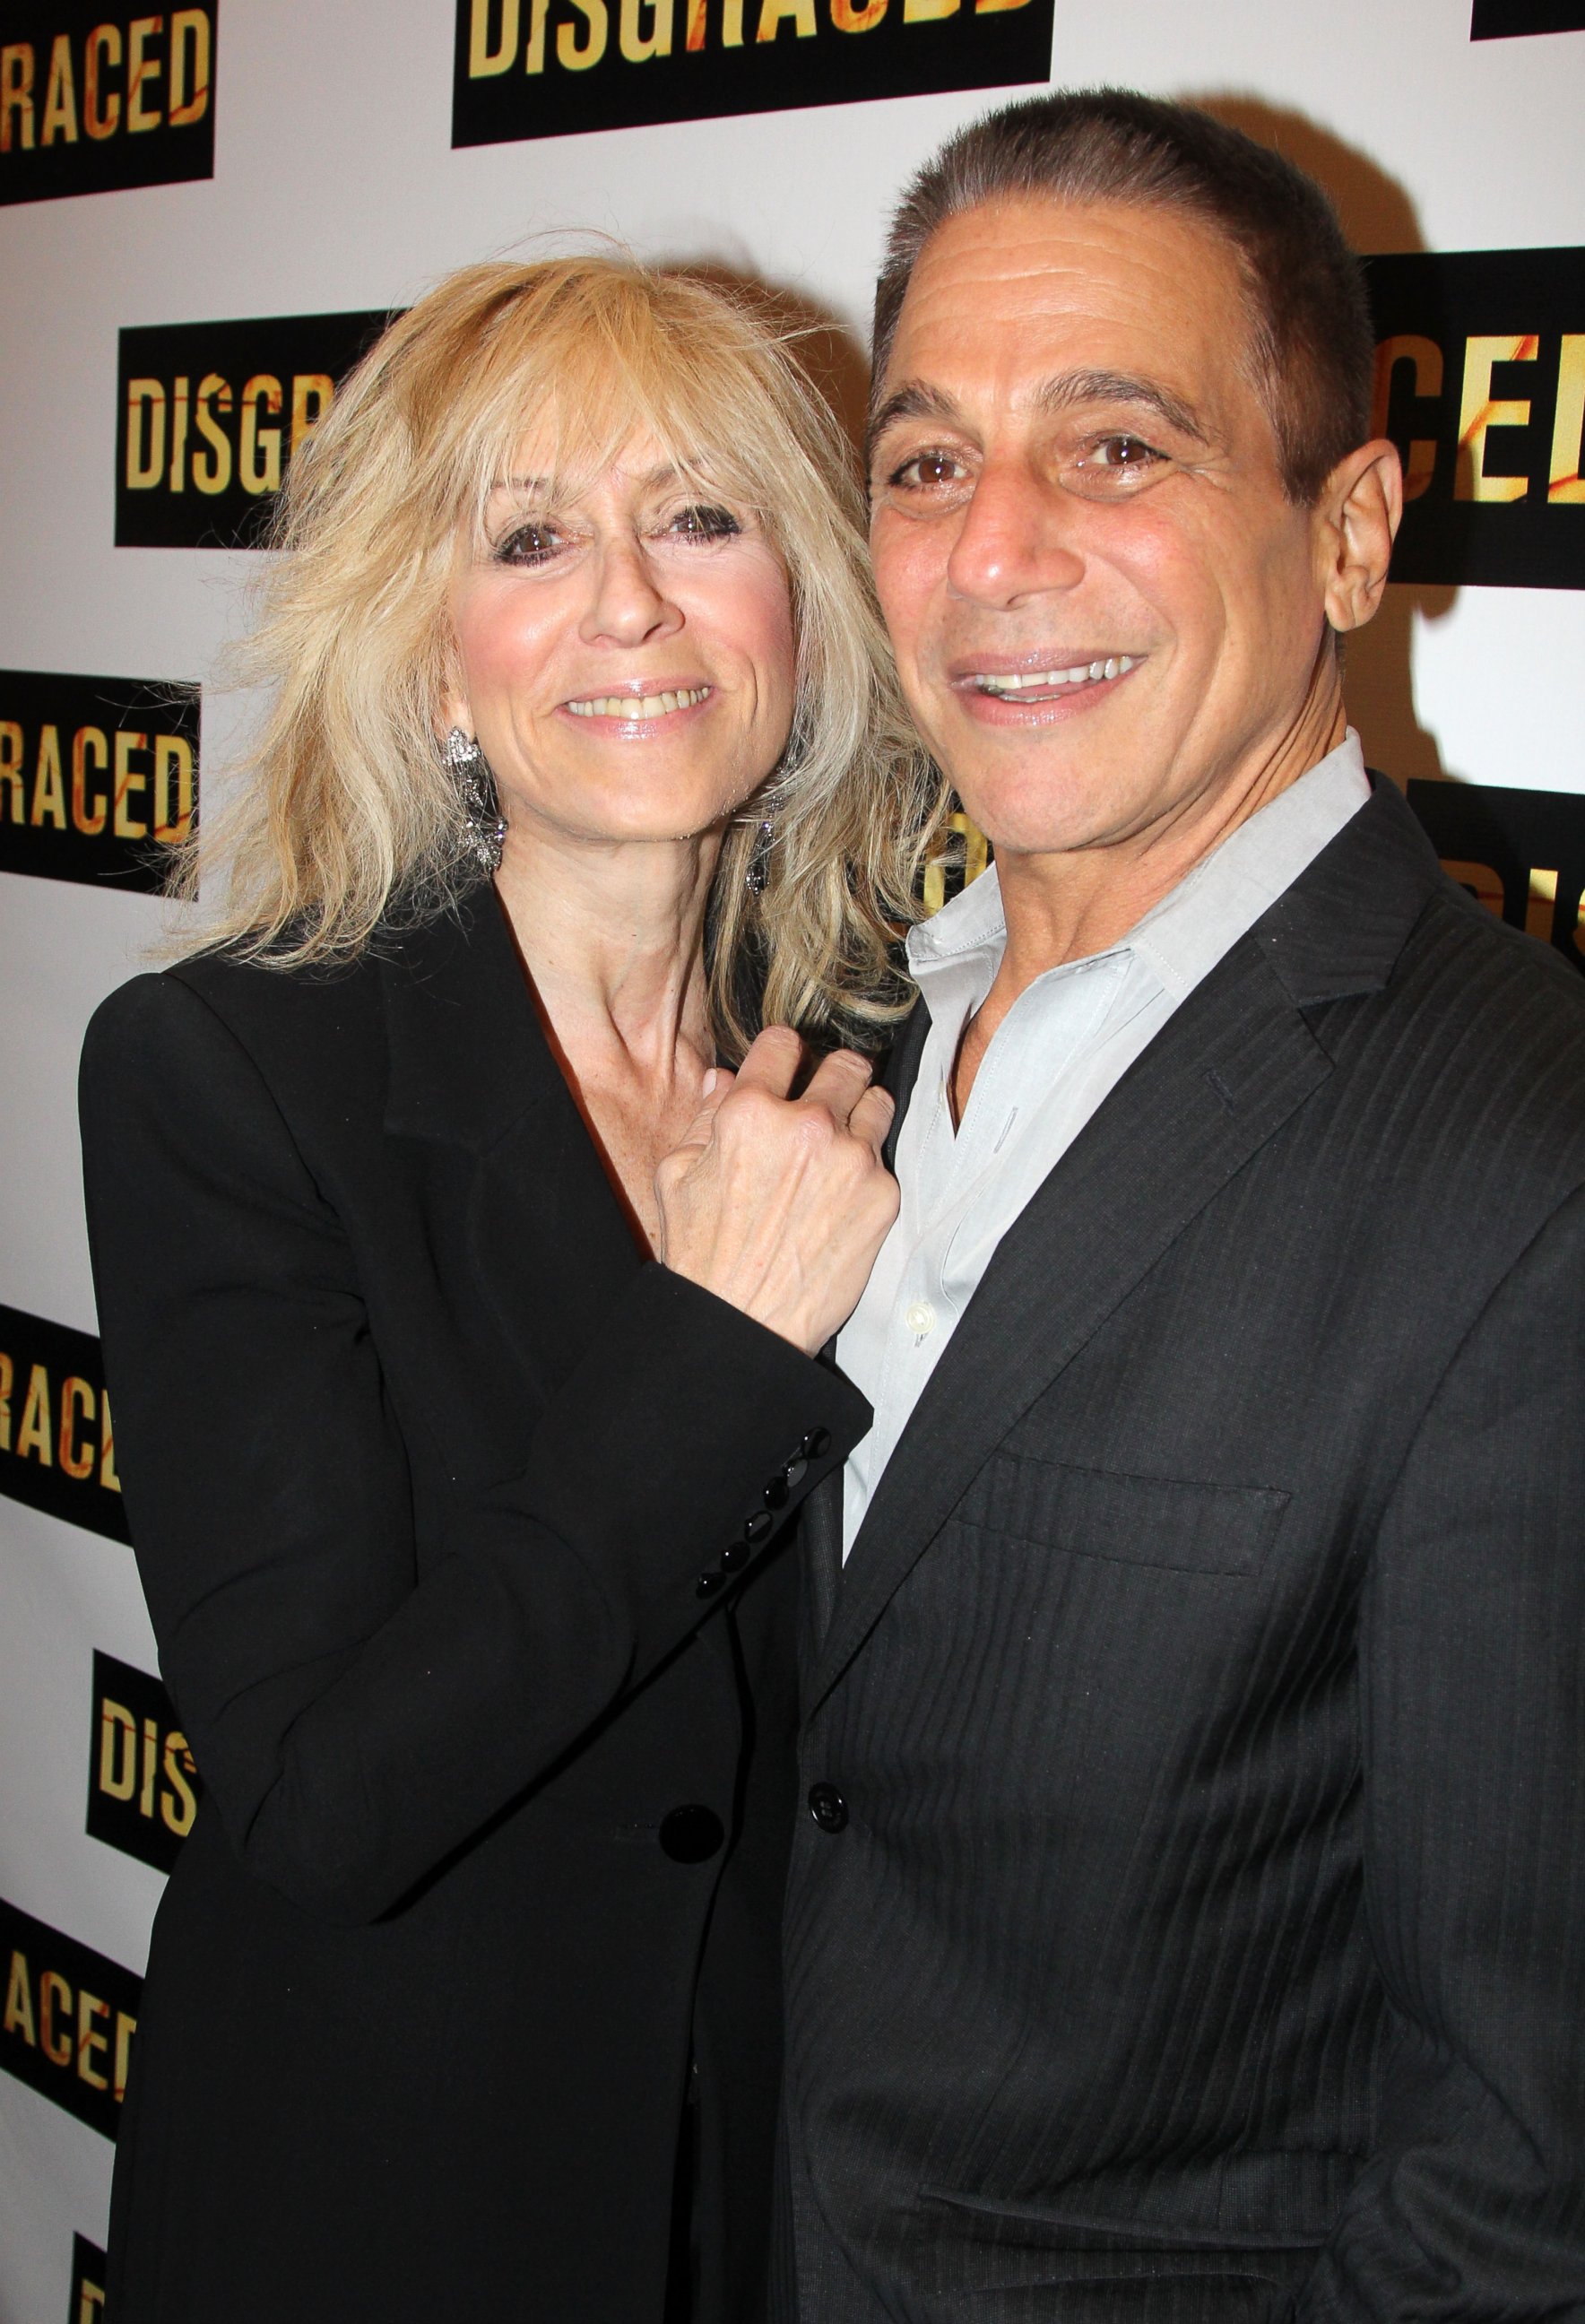 PHOTO: Judith Light and Tony Danza at the opening night of "Disgraced" on Broadway at The Lyceum Theatre on Oct. 23, 2014 in New York City.